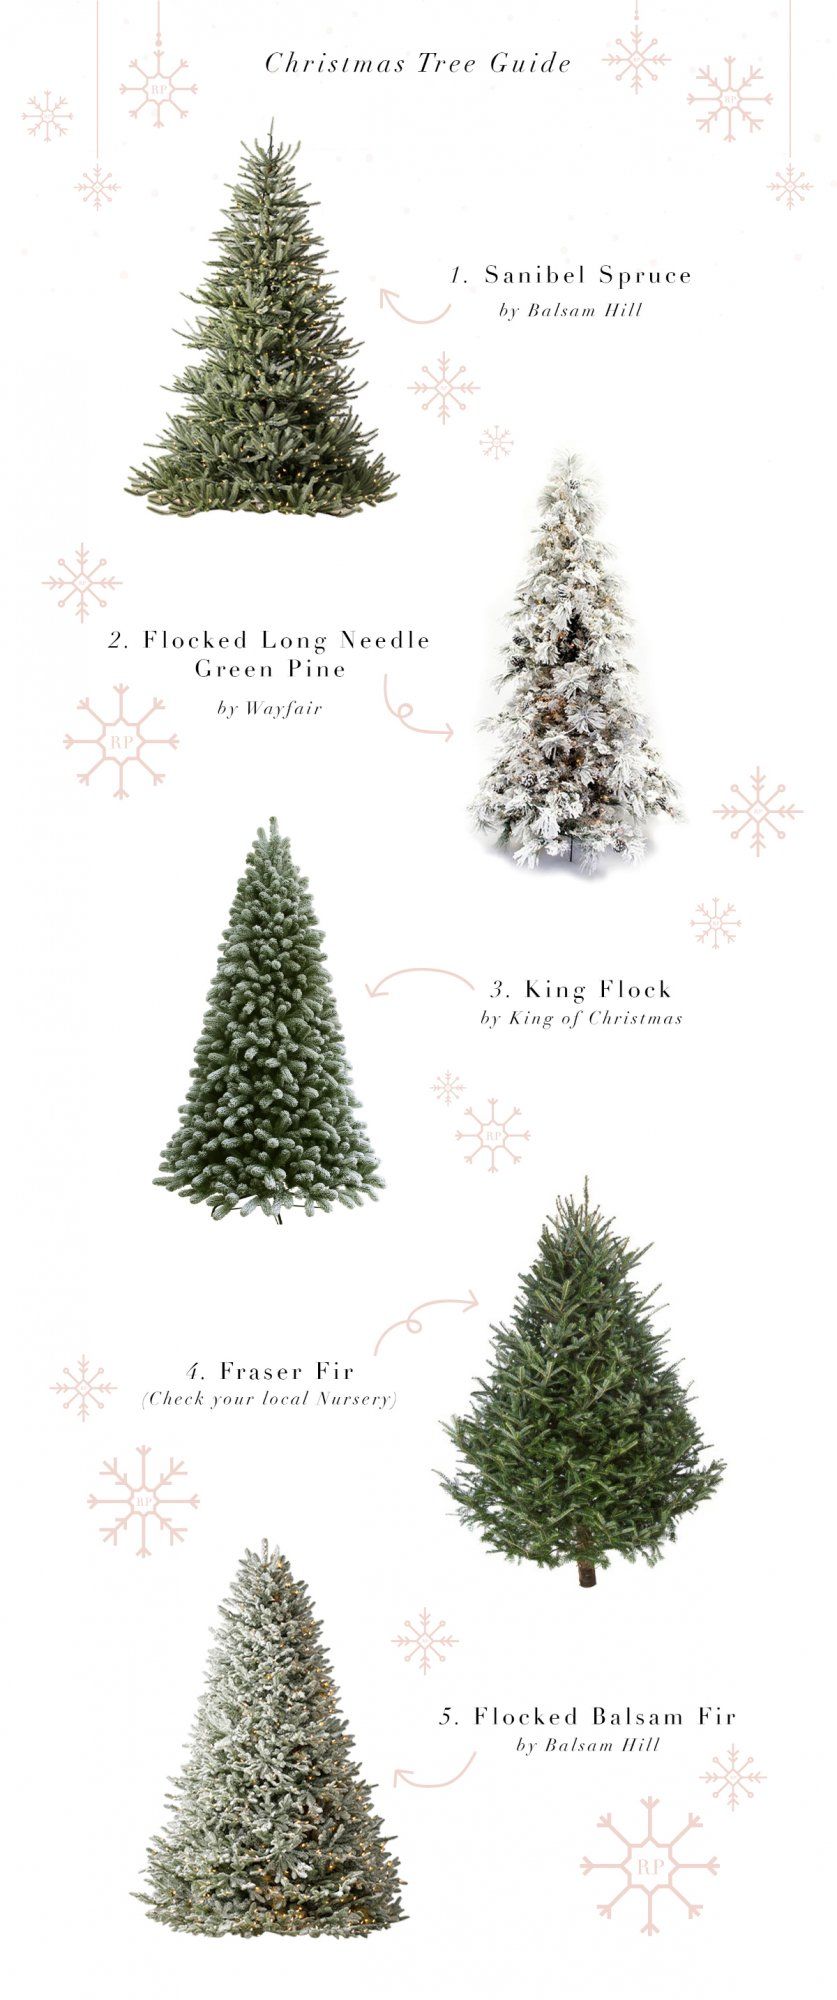 Guide to picking out the perfect Christmas tree...